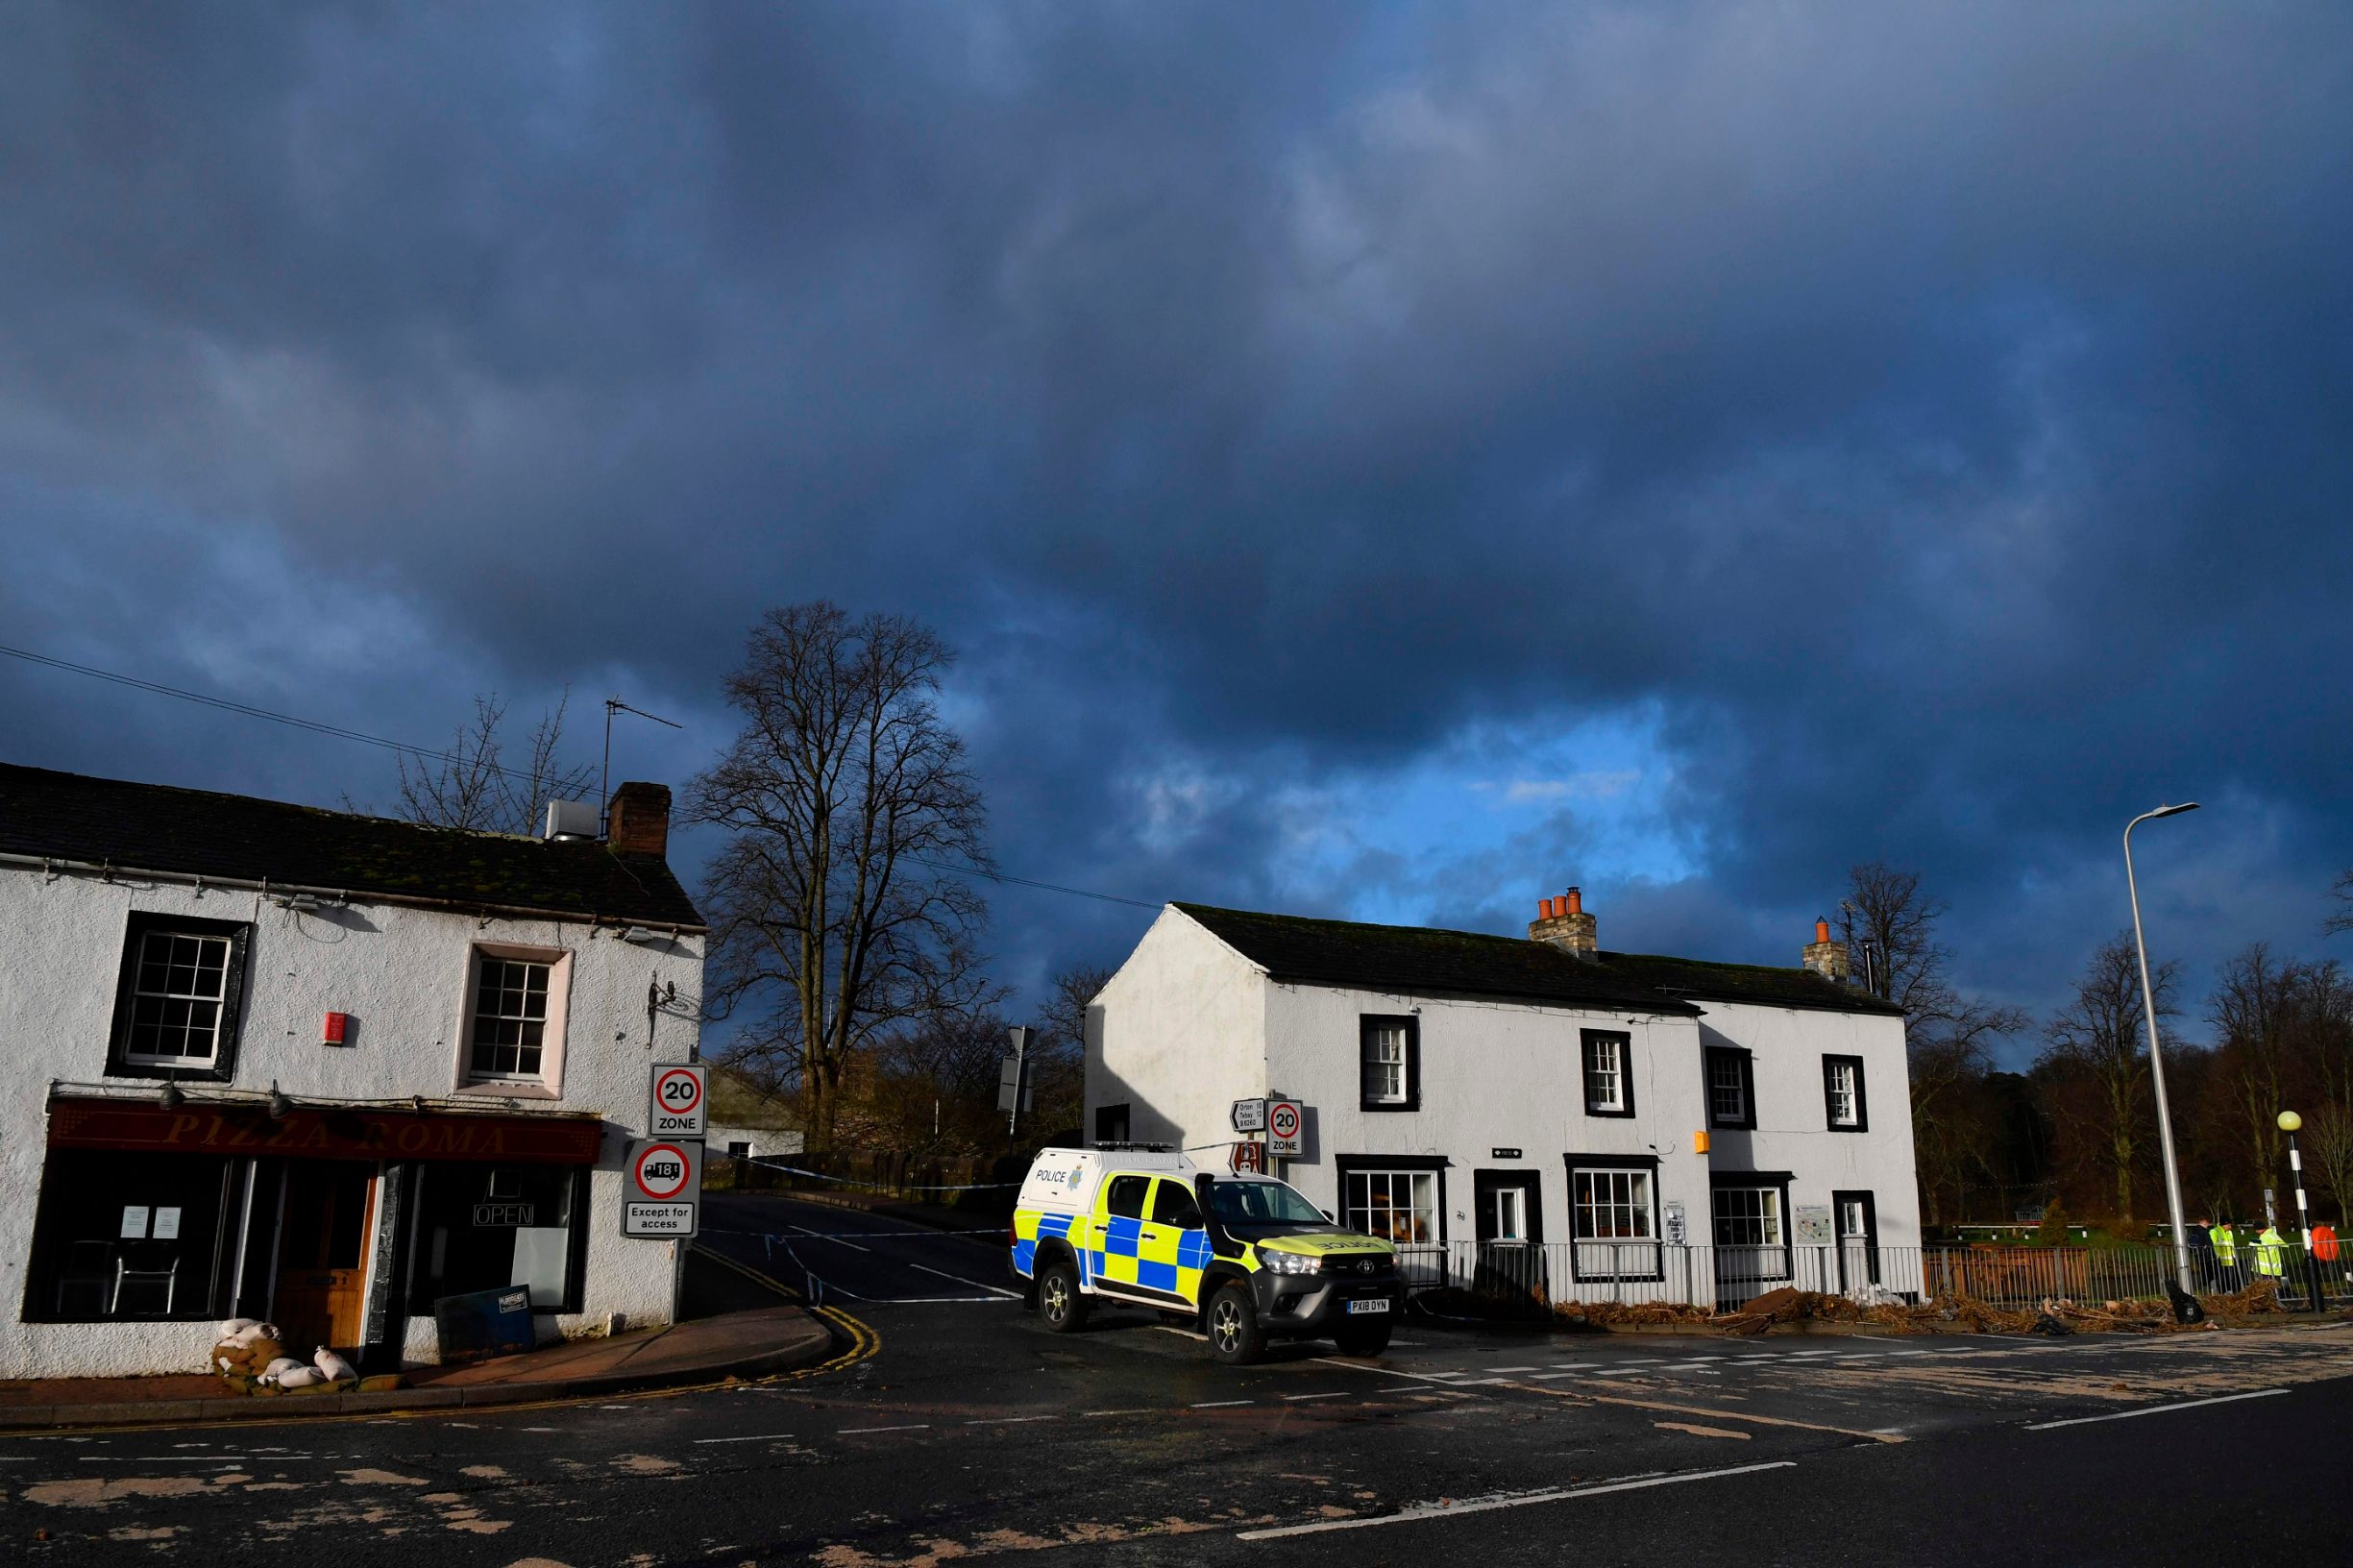 A police vehicle is positioned to block entry to a bridge for it to be checked for structural integrity in Appleby, northwest England, on February 10, 2020 after flooding brought by Storm Ciara. - Storm Ciara grounded hundreds of flights Monday and left swatches of Europe without power after unleashing torrential rain and causing flash flooding that cancelled football matches in Britain. (Photo by Paul ELLIS / AFP)